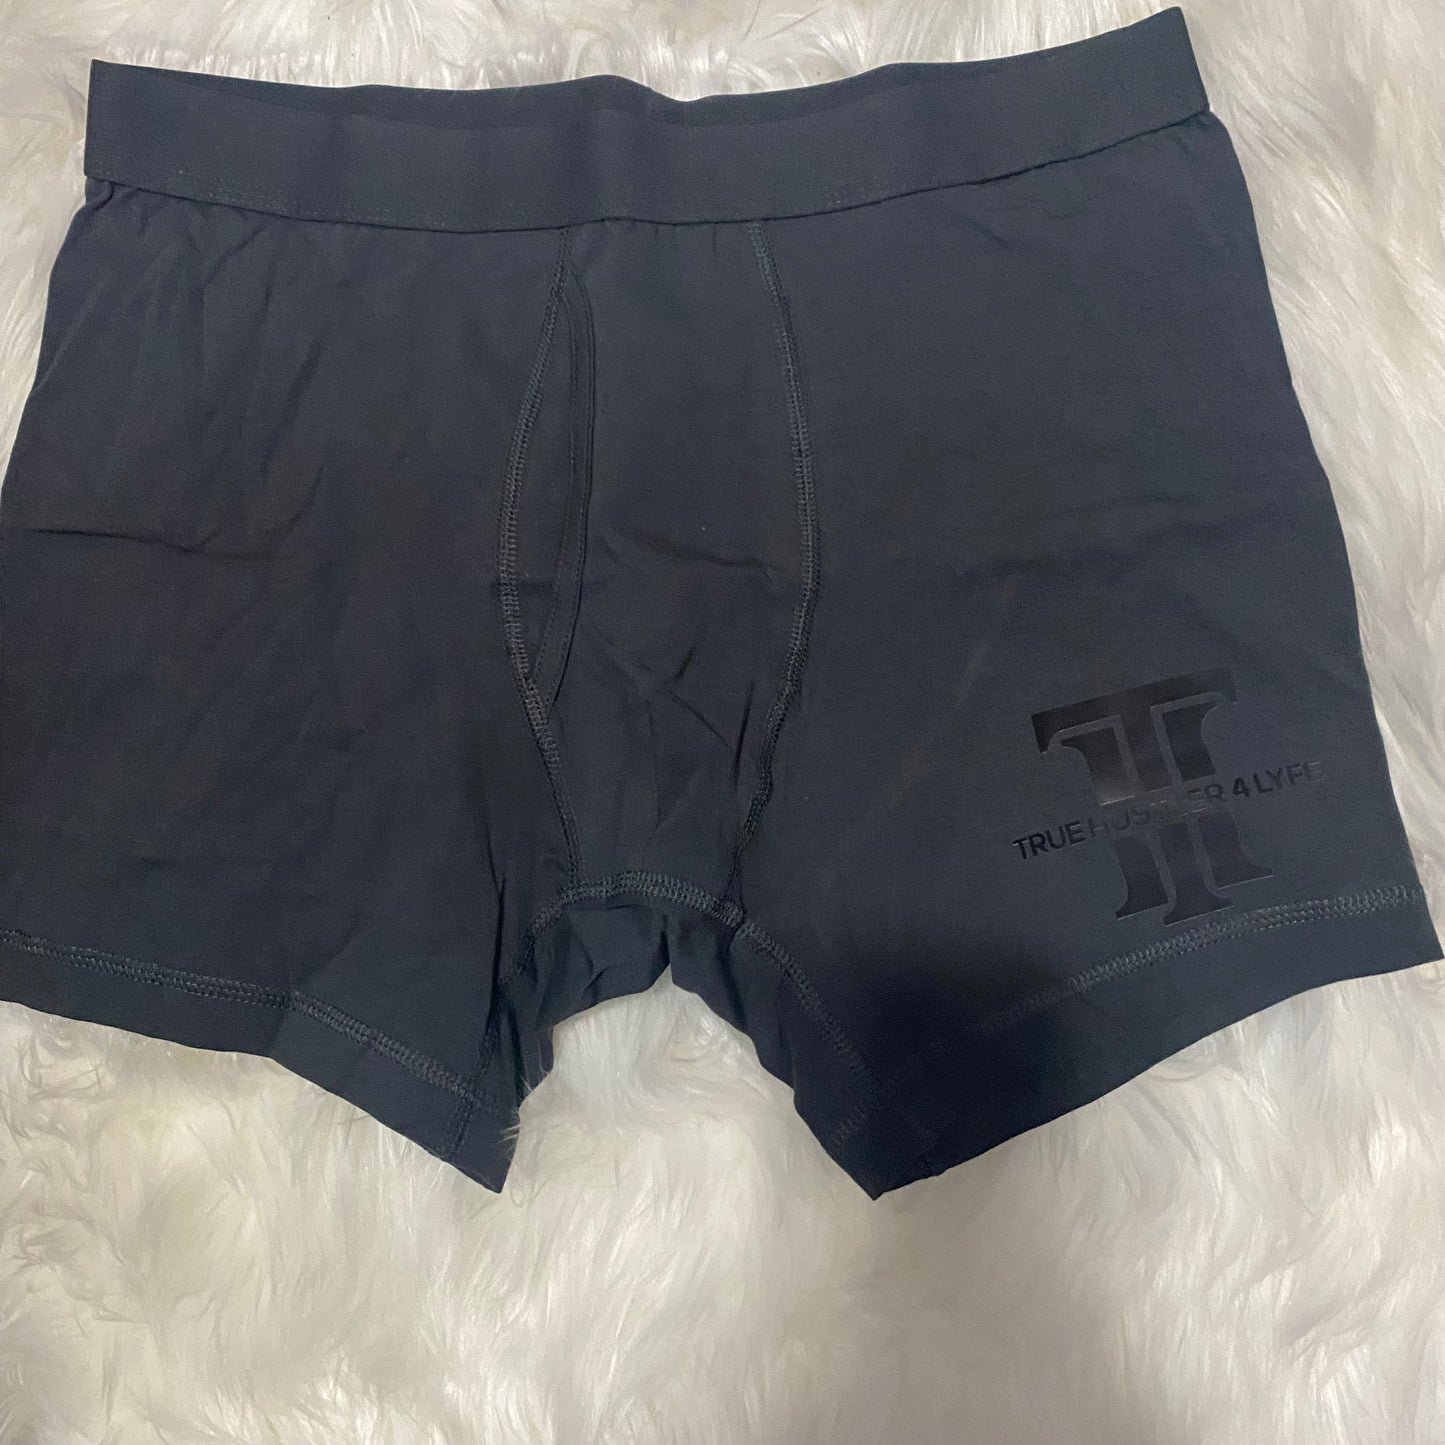 Men's Dark Gray Boxer Brief Set with White Tee and Black Hustler Logo (LIMITED EDITION)